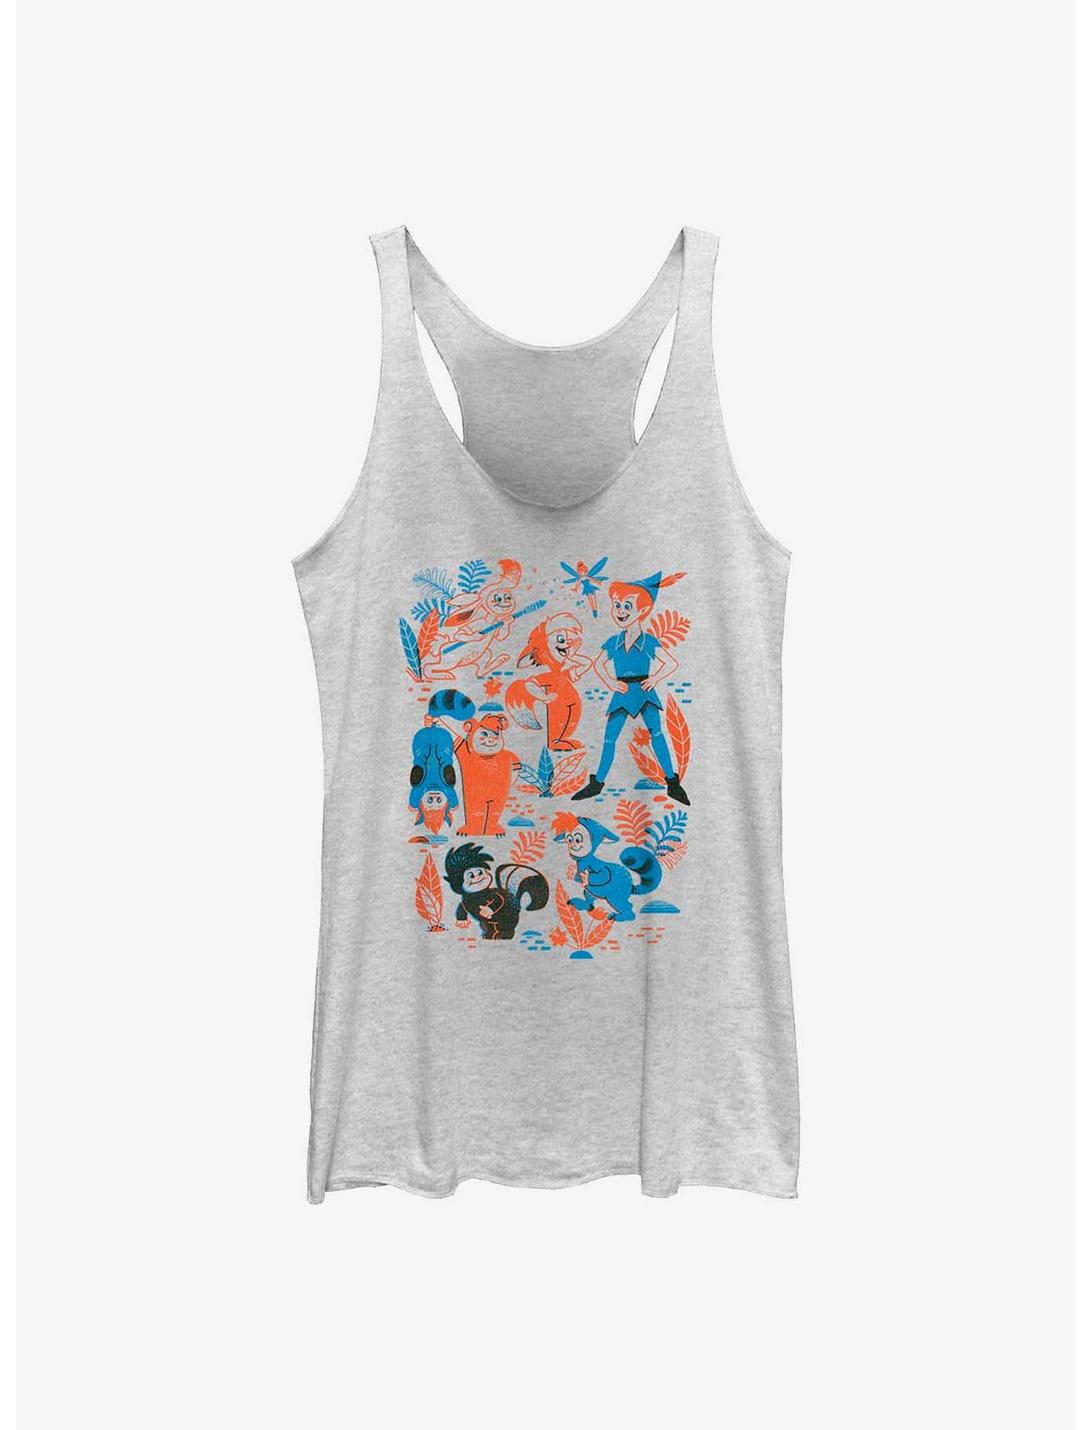 Disney Peter Pan and the Lost Boys Girls Tank, WHITE HTR, hi-res